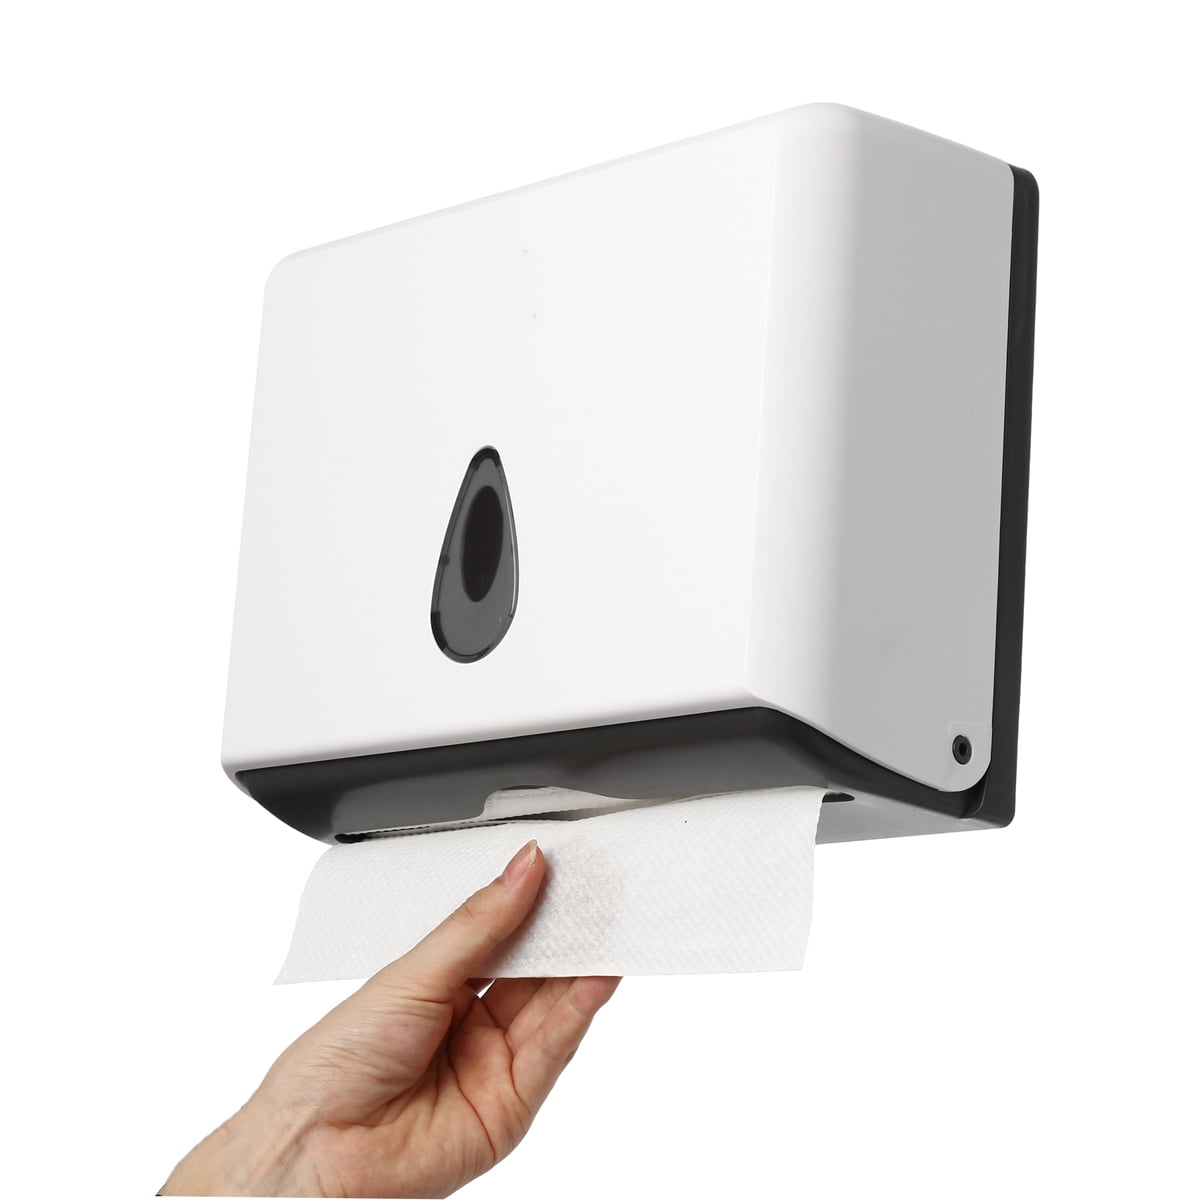 Chuangdian Multifold Paper Towel Dispenser Wall mounted 